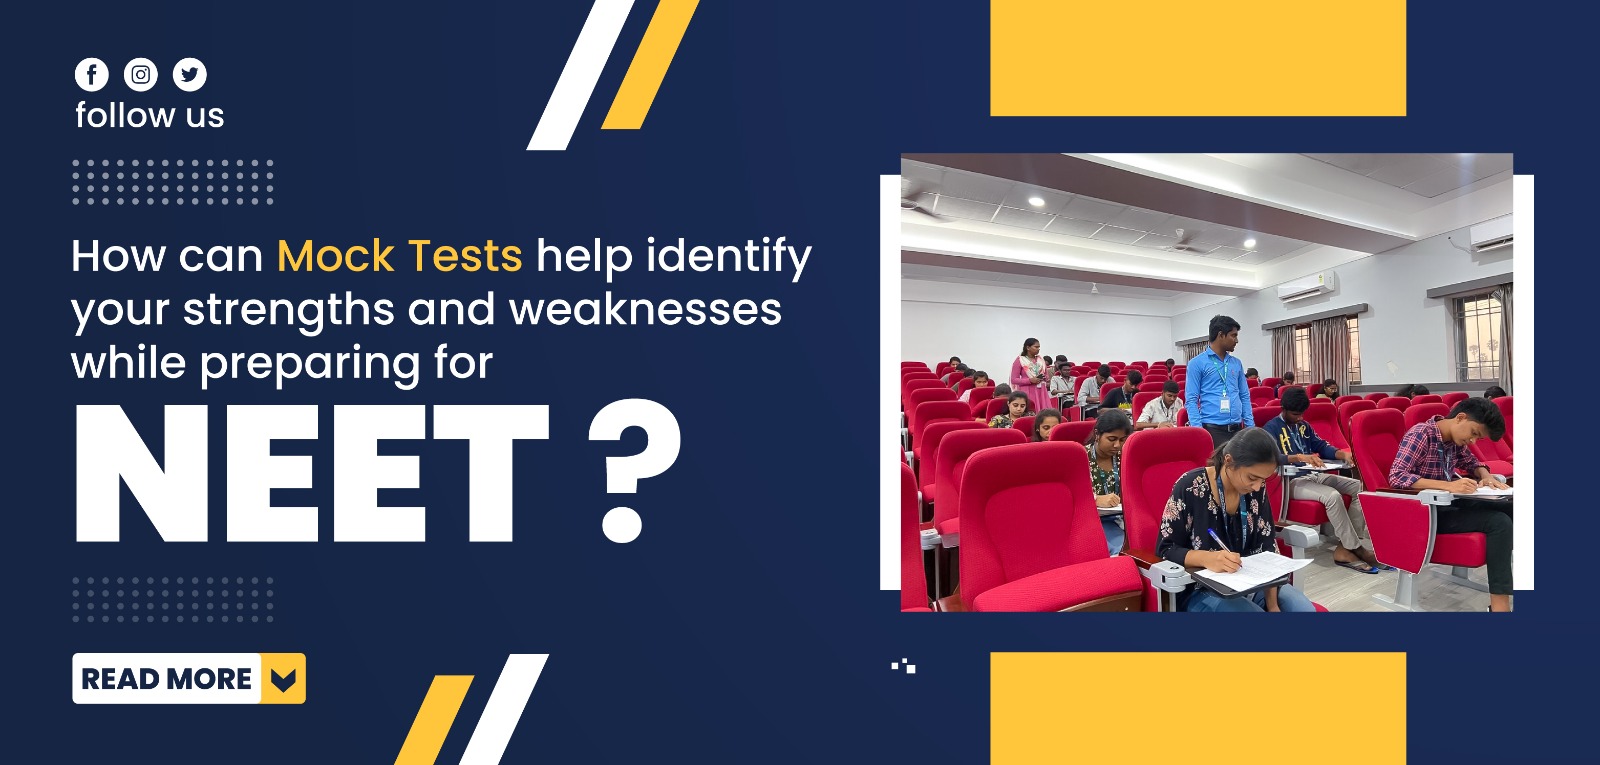 How can mock tests help identify your strengths and weaknesses while preparing for NEET?